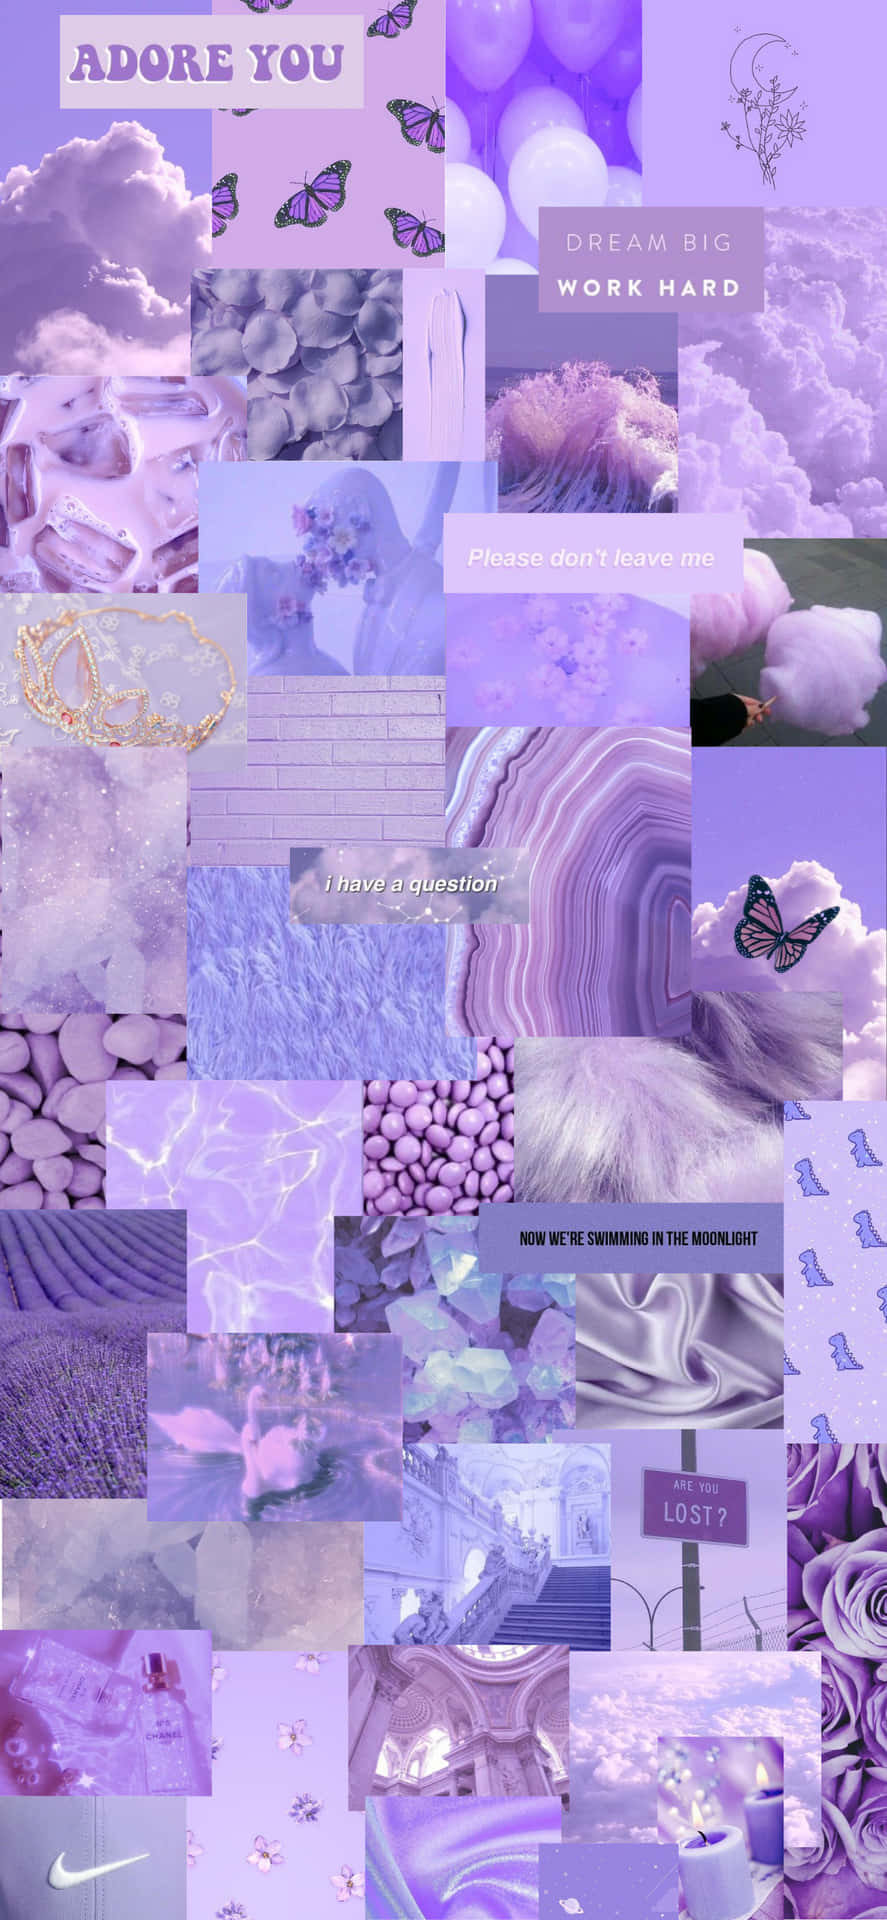 Download Soft Girly Purple Collage Wallpaper | Wallpapers.com